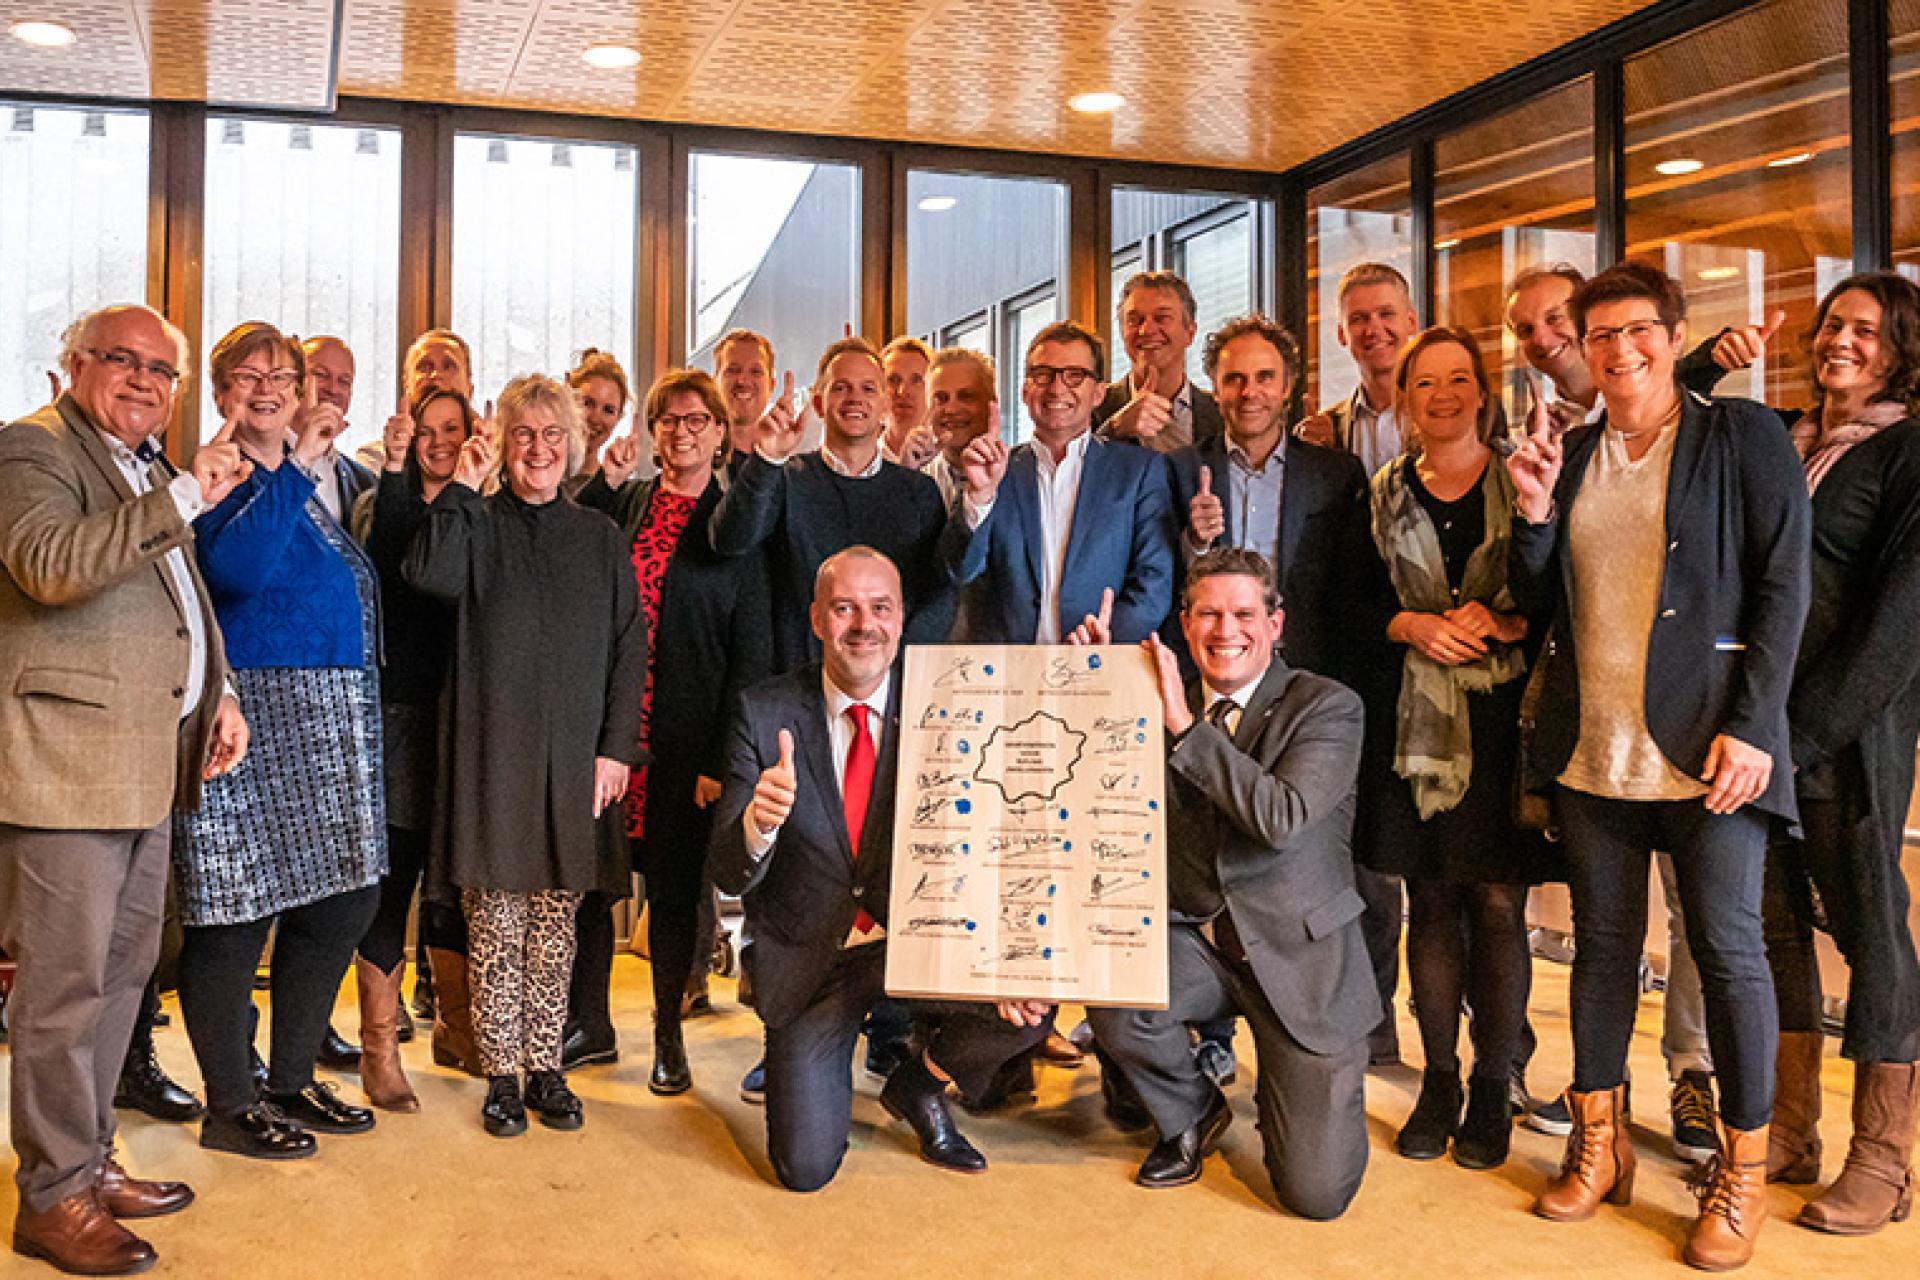 The municipality of Zwolle and several organisations signed a convenant at the city hall. They sealed their cooperation with a blue fingerprint. 